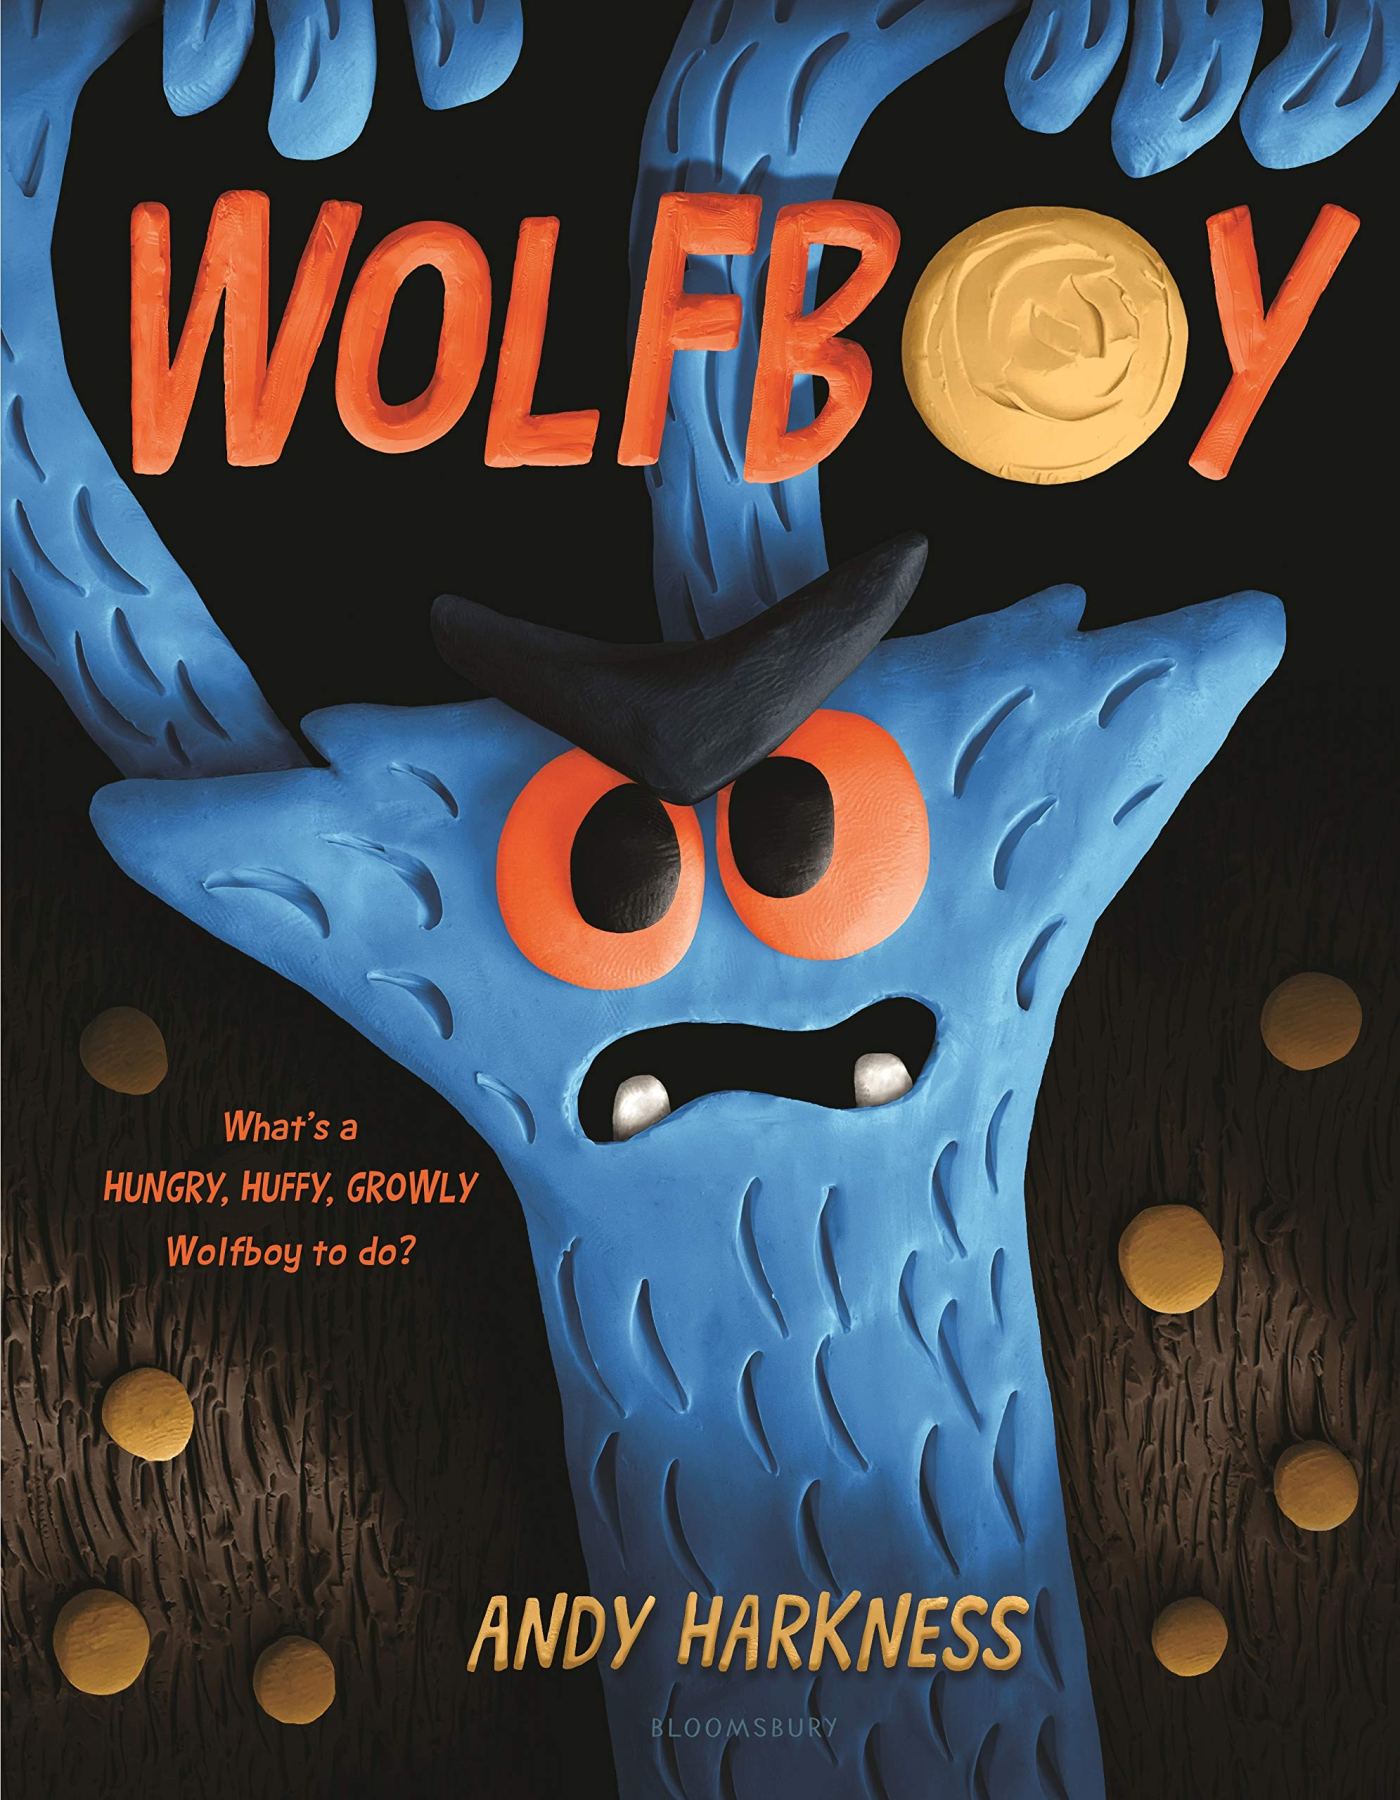 Front cover image of WolfBoy of a blue plastercine wolf with red eyes and two blue teeth with this hands above his head.